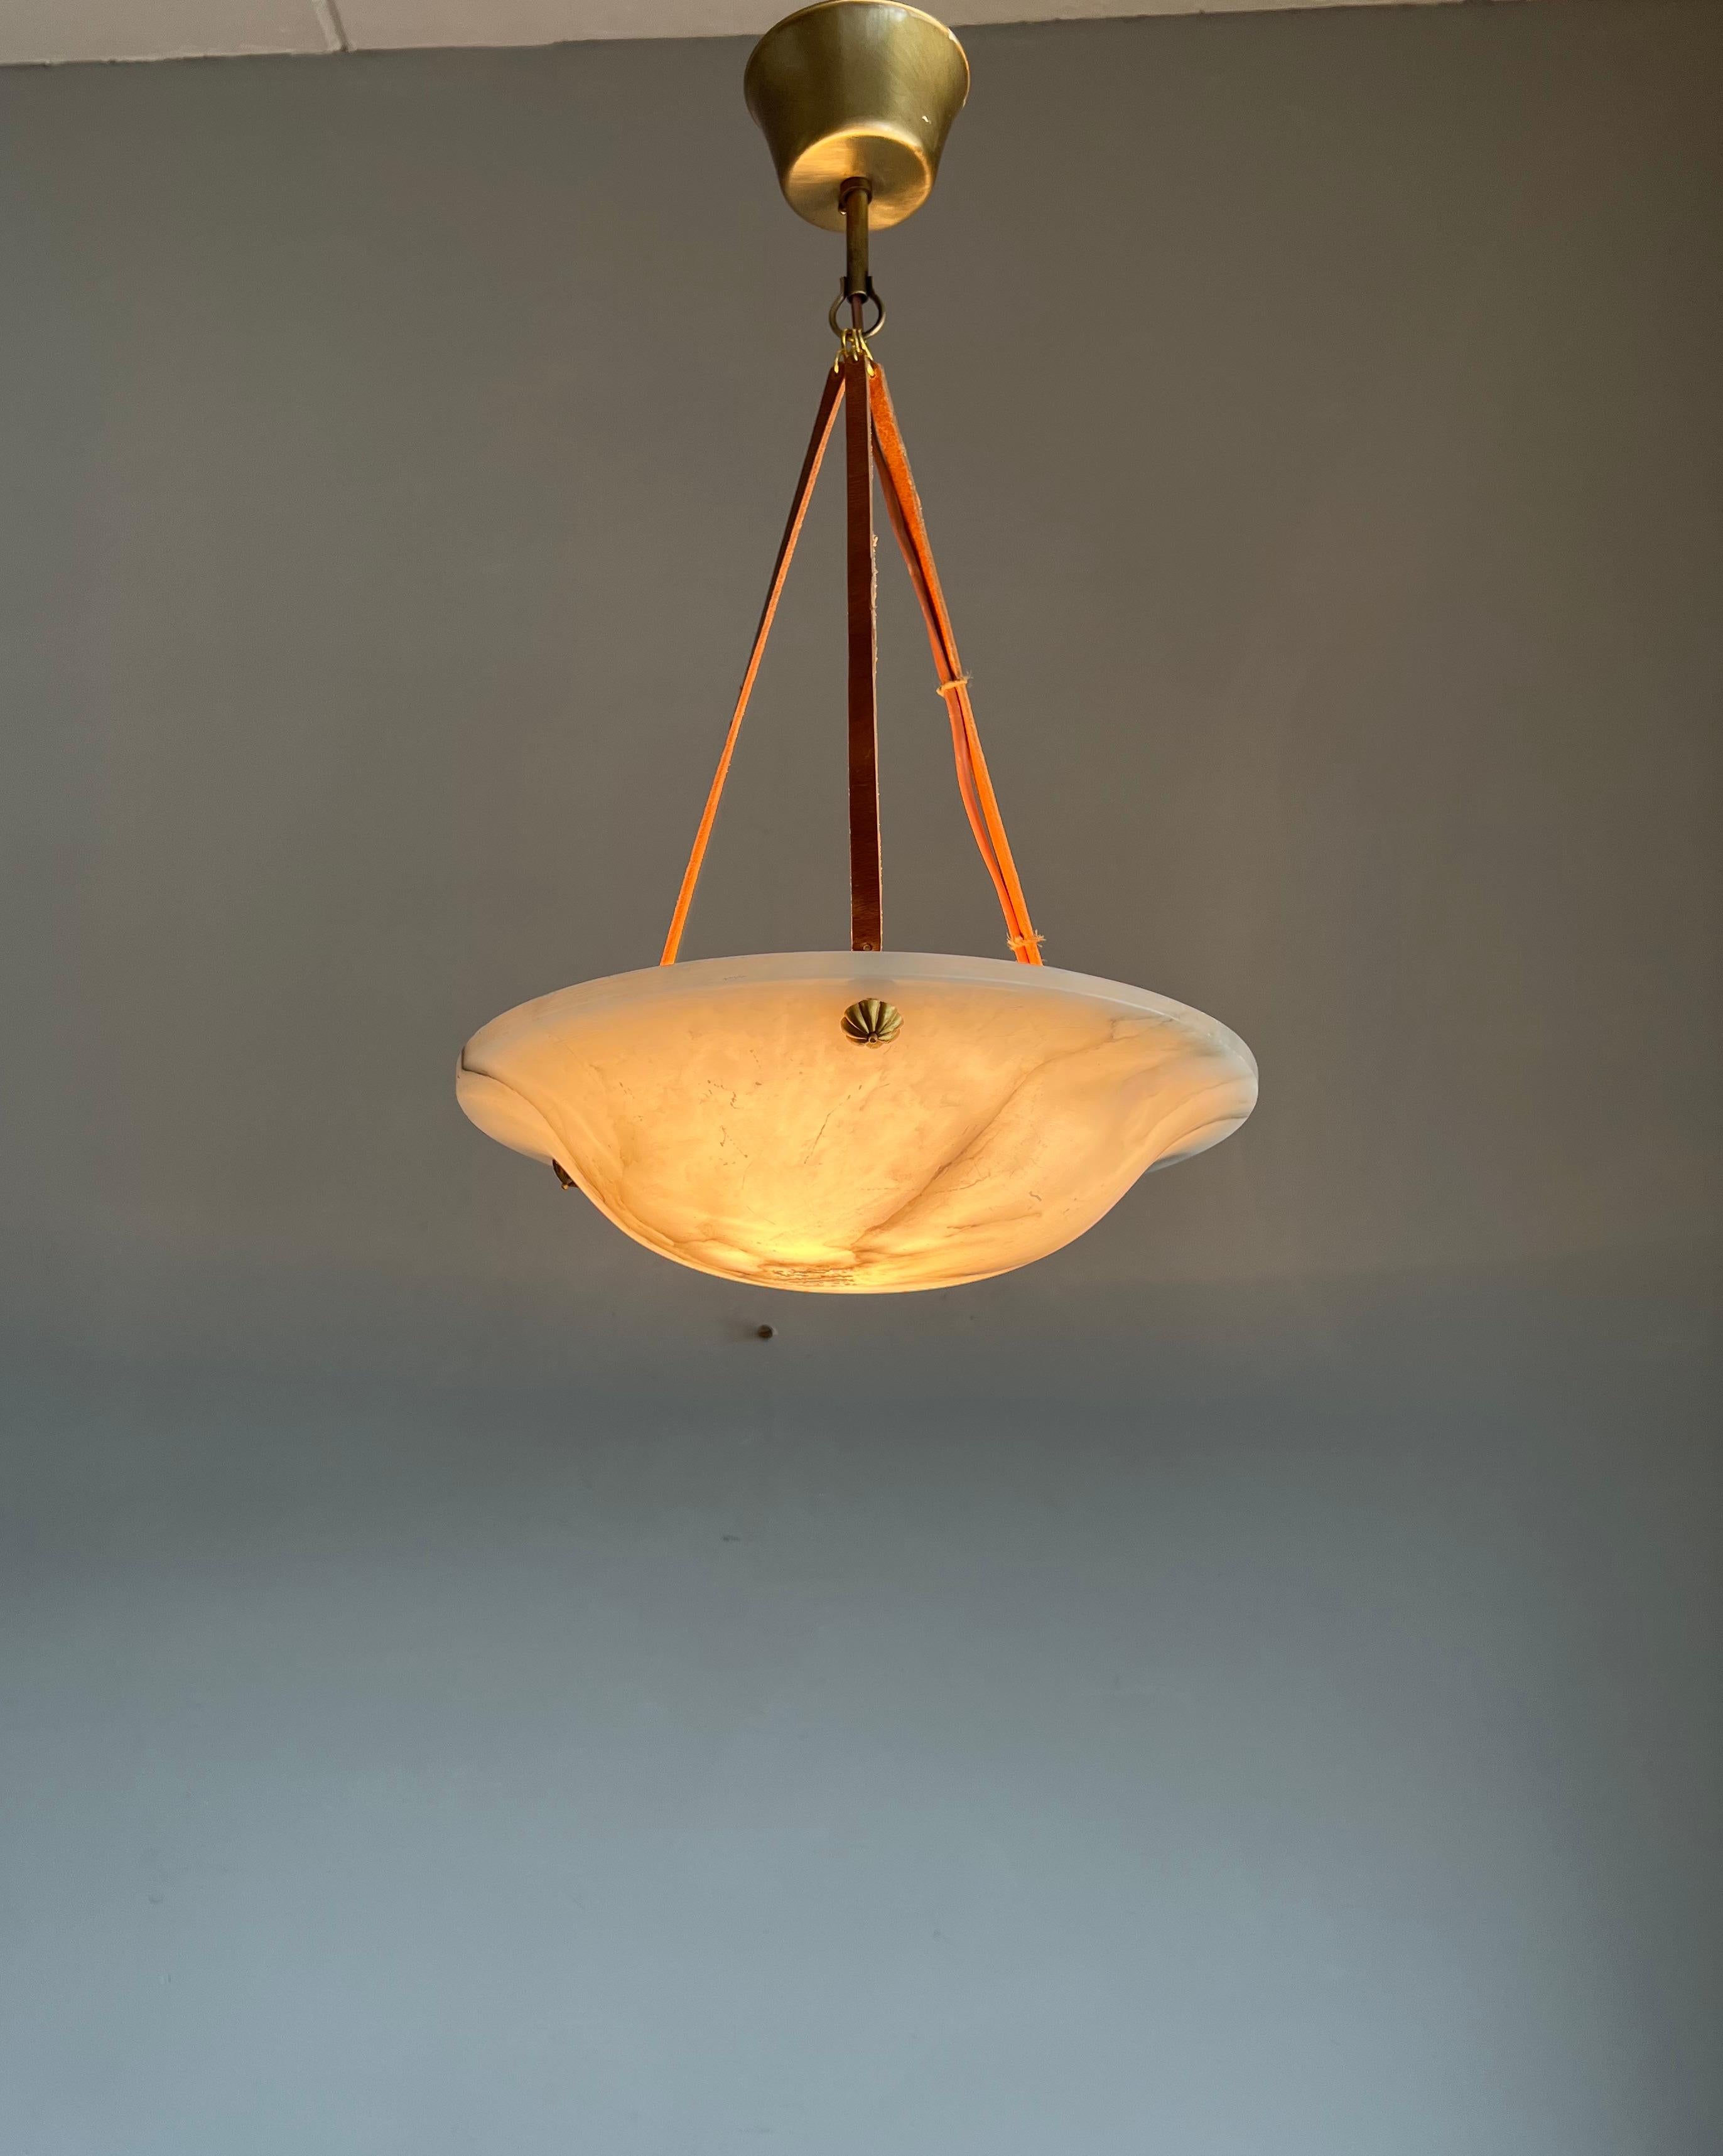 Patinated Small & Timeless French Art Deco Alabaster Pendant Light with Leather Rope, 1920 For Sale